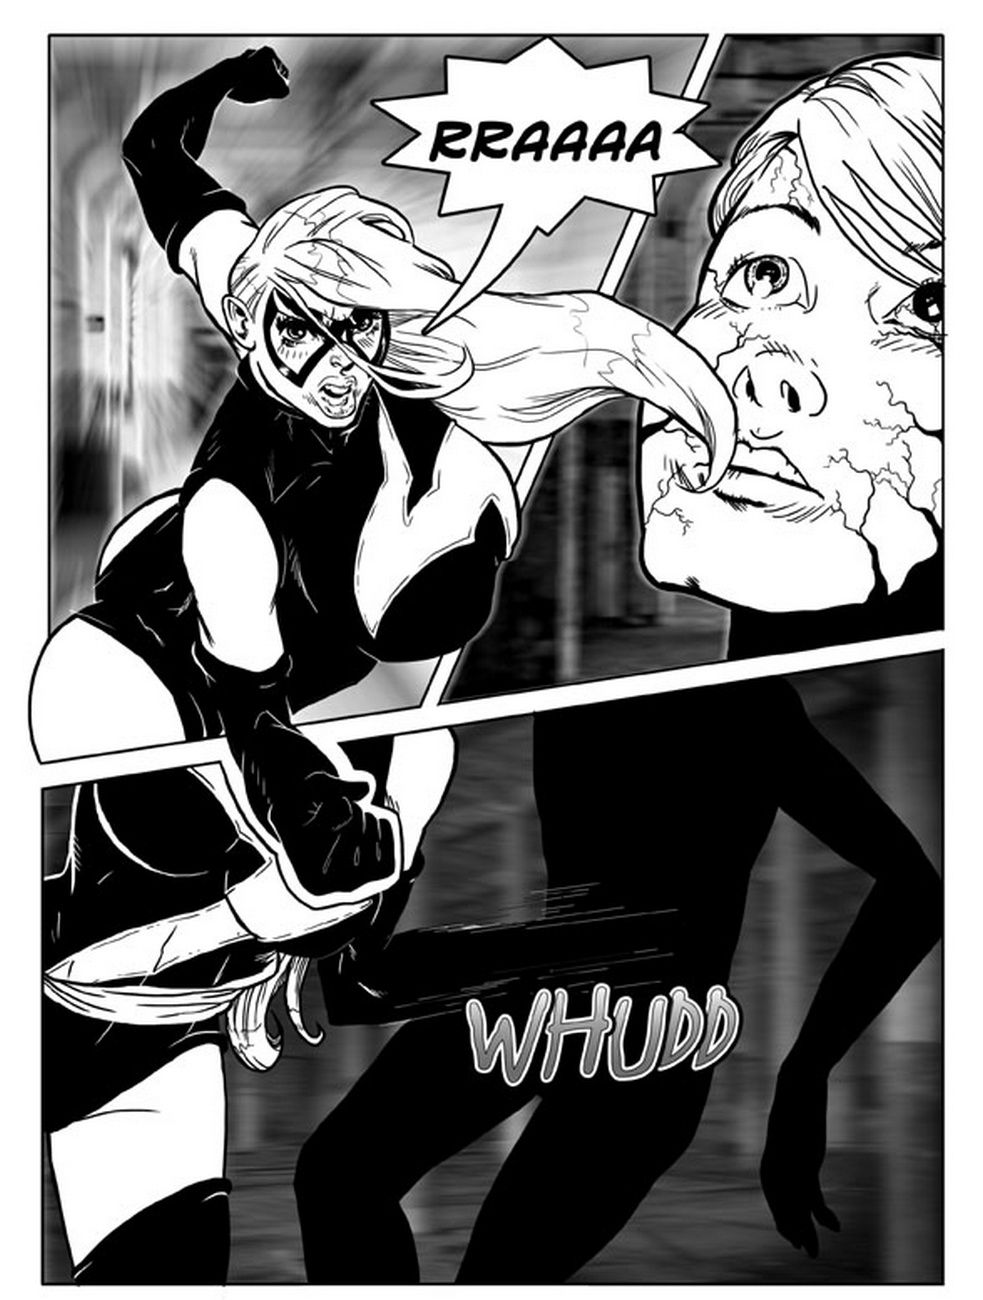 Submission Agenda 10 - Ms Marvel page 4